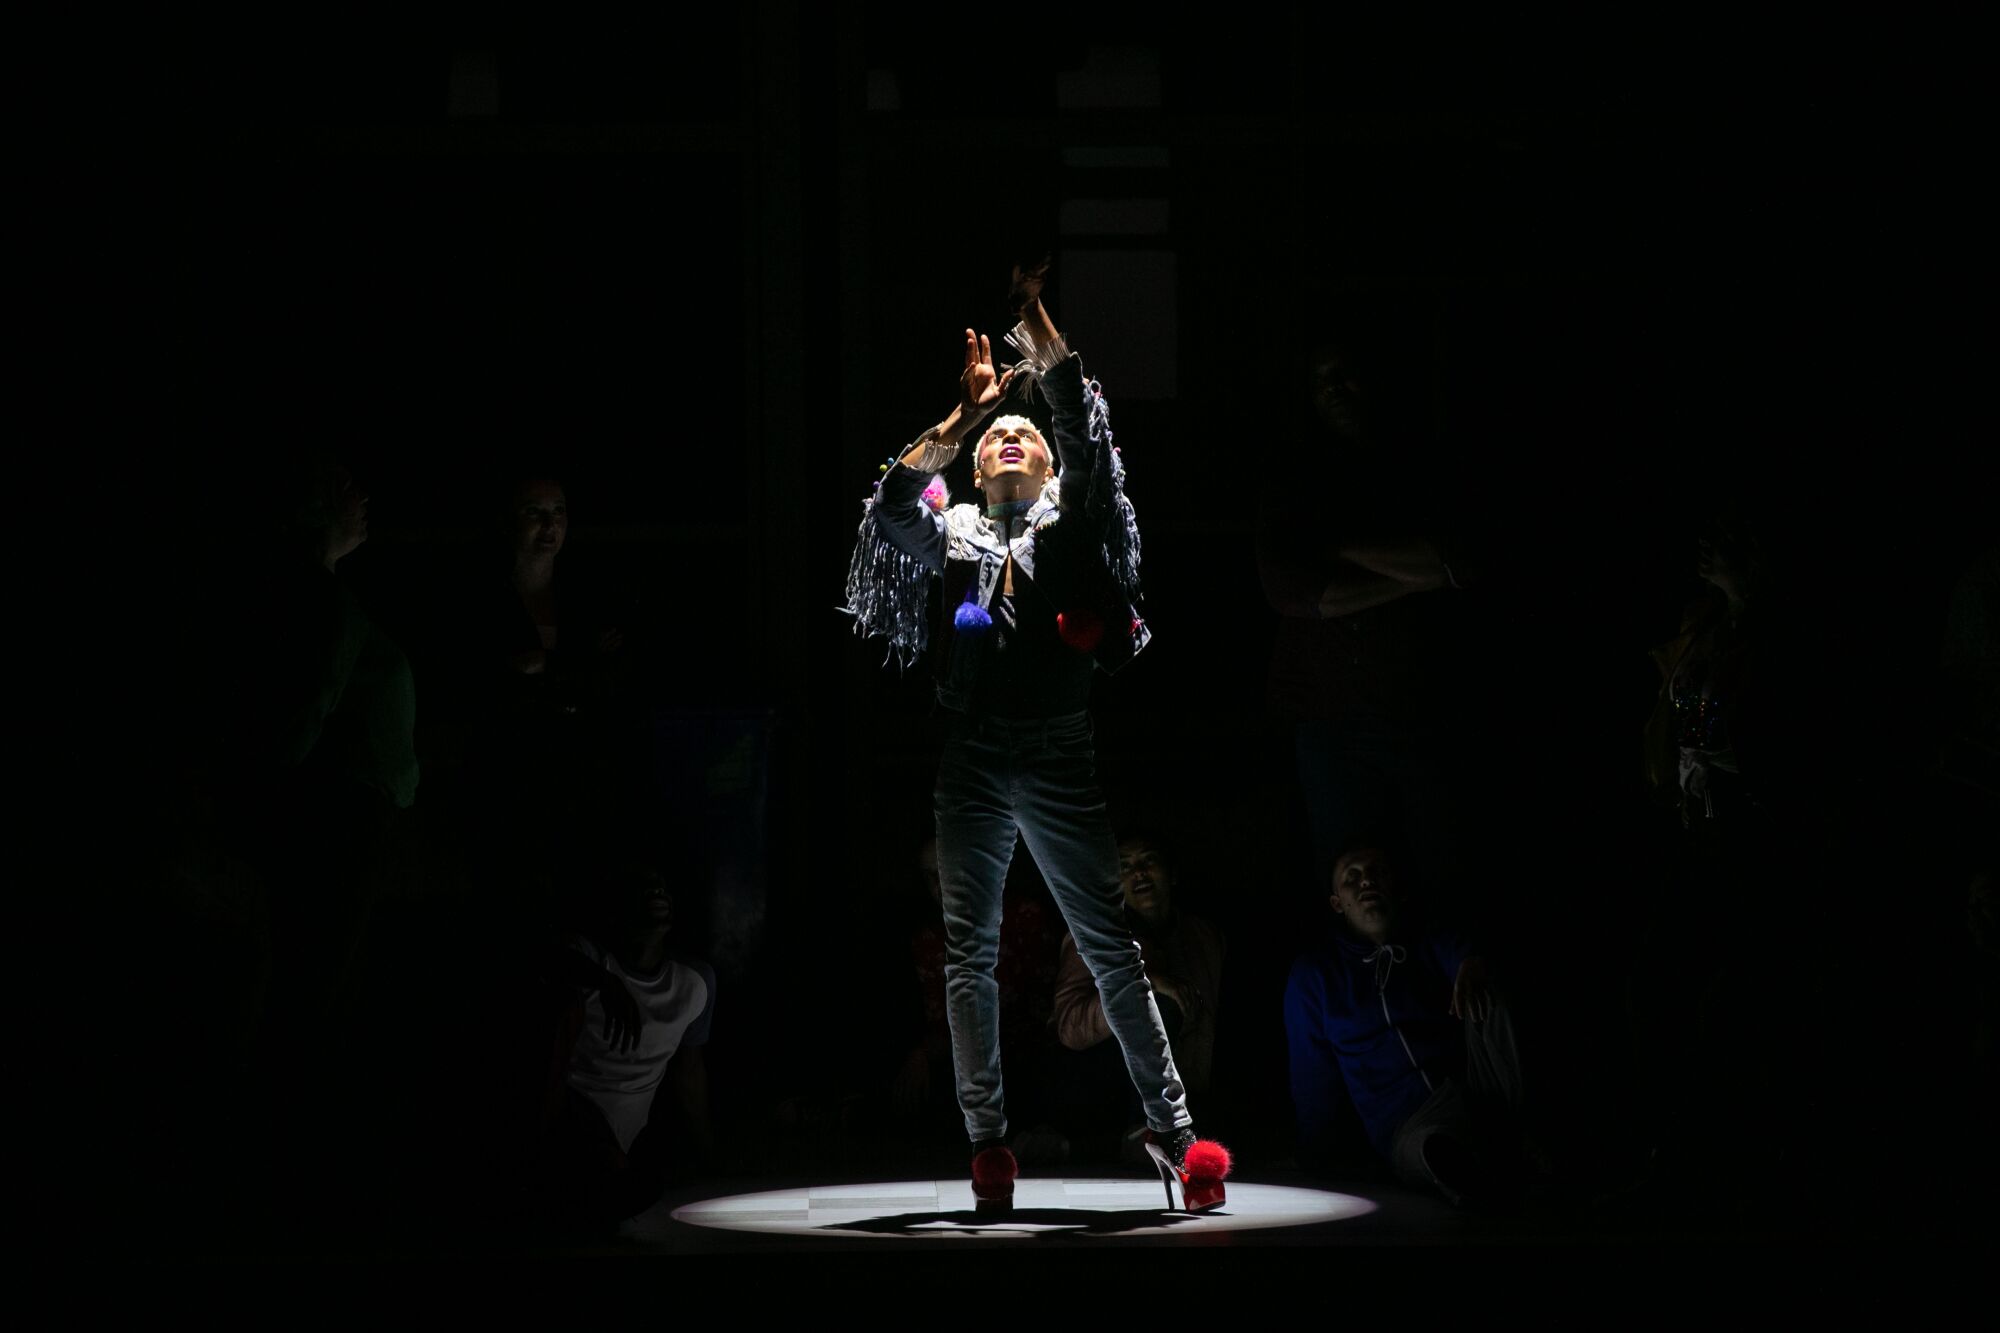 A man stands under a spotlight with his hands raised.